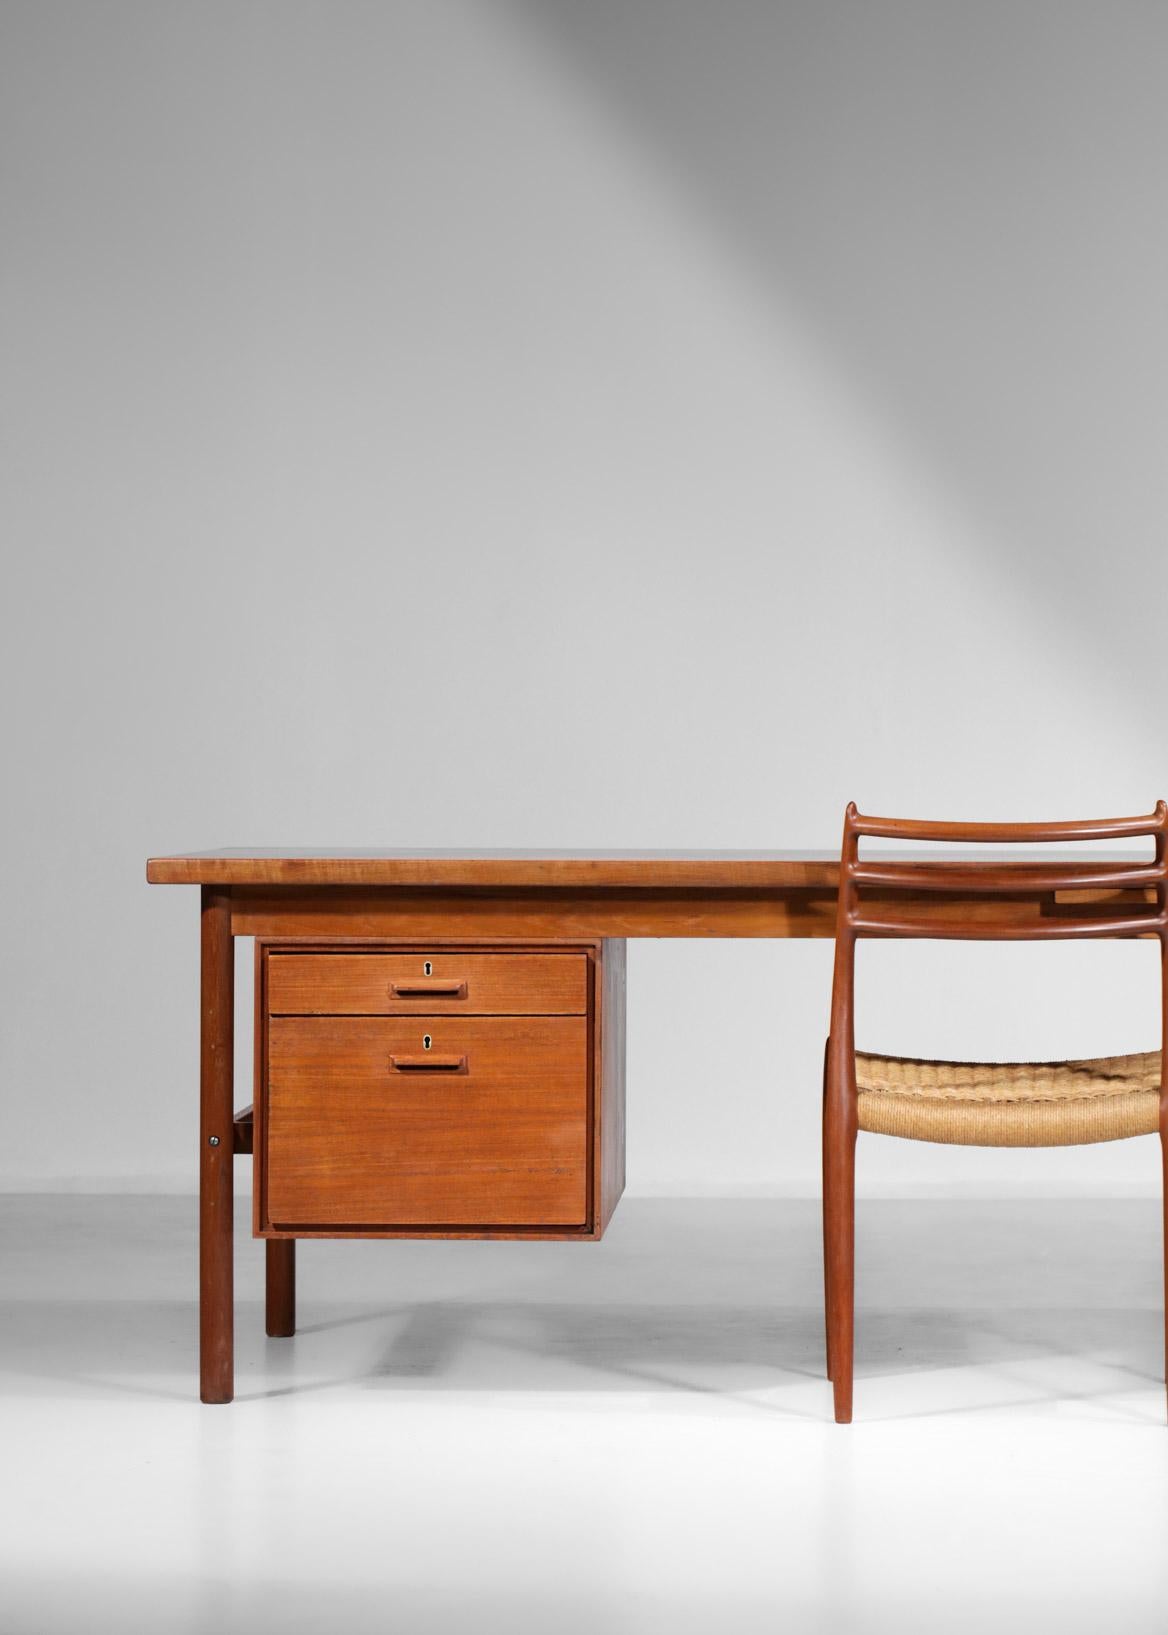 Scandinavian desk from the 1960s. Structure in solid teak and teak veneer, consisting of a hanging pedestal with two drawers on one side and a shelf with a hinged door on the other side and a retractable shelf. The set has a traditional Scandinavian